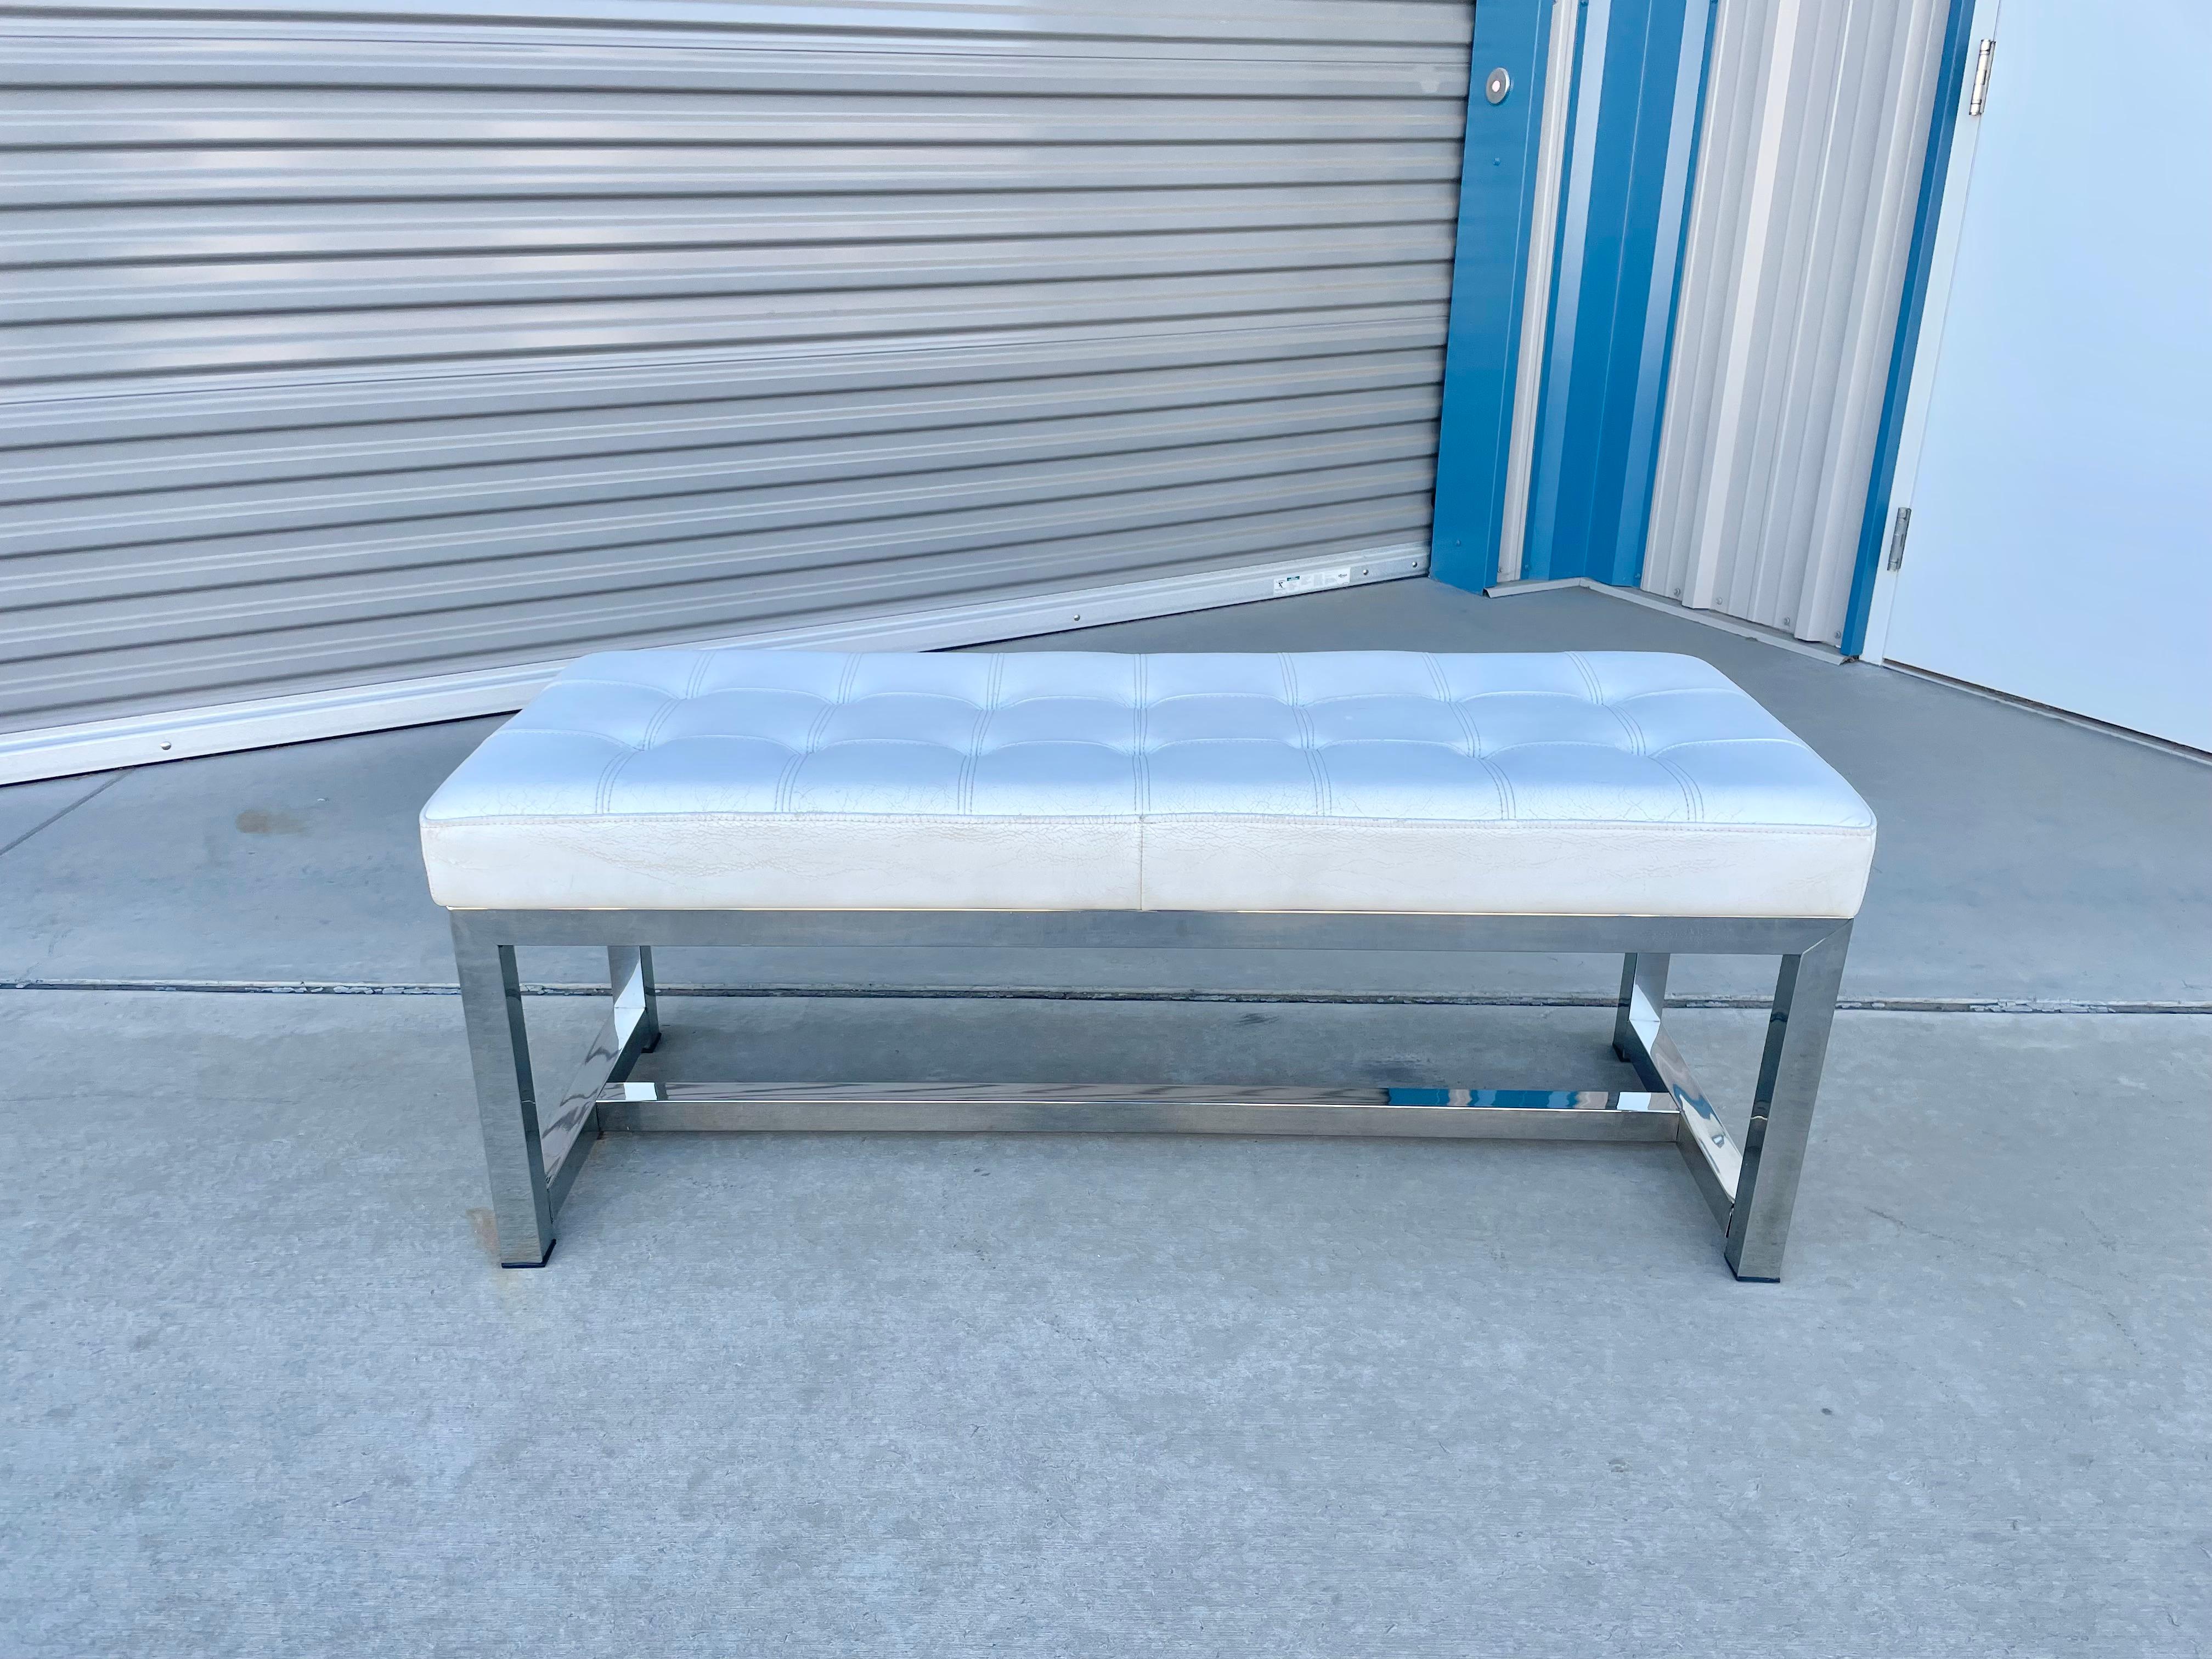 Beautiful vintage leather & steel bench designed and manufactured in the united states circa 1970s. This bench features a leather upholstery on top of a stainless steel base